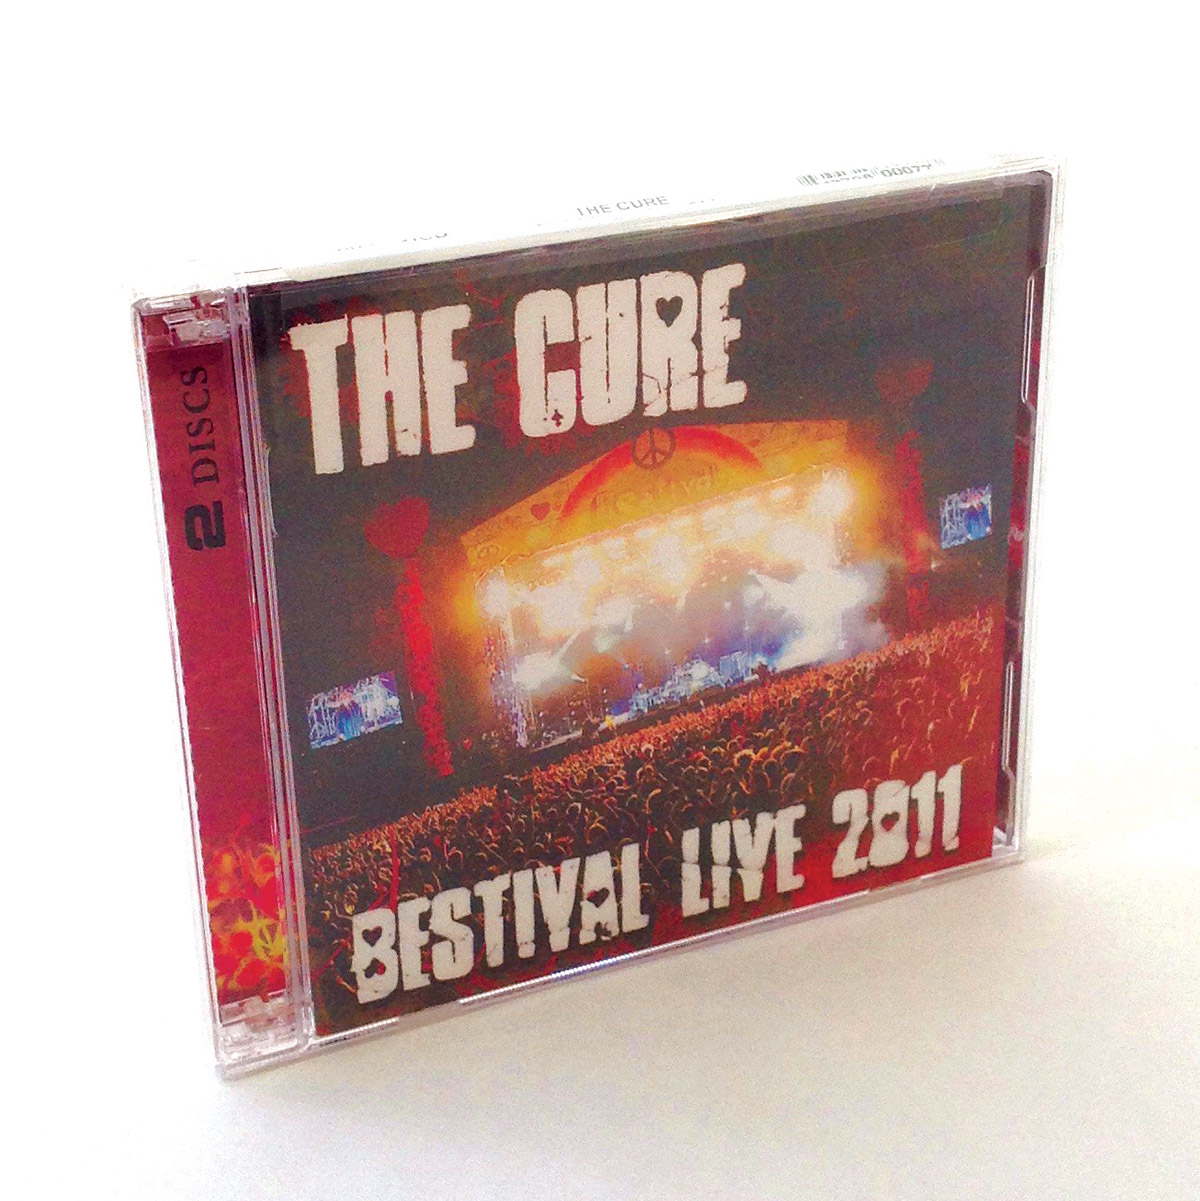 The Cure Double Jewel - Affordable CD / Compact Disc Replication